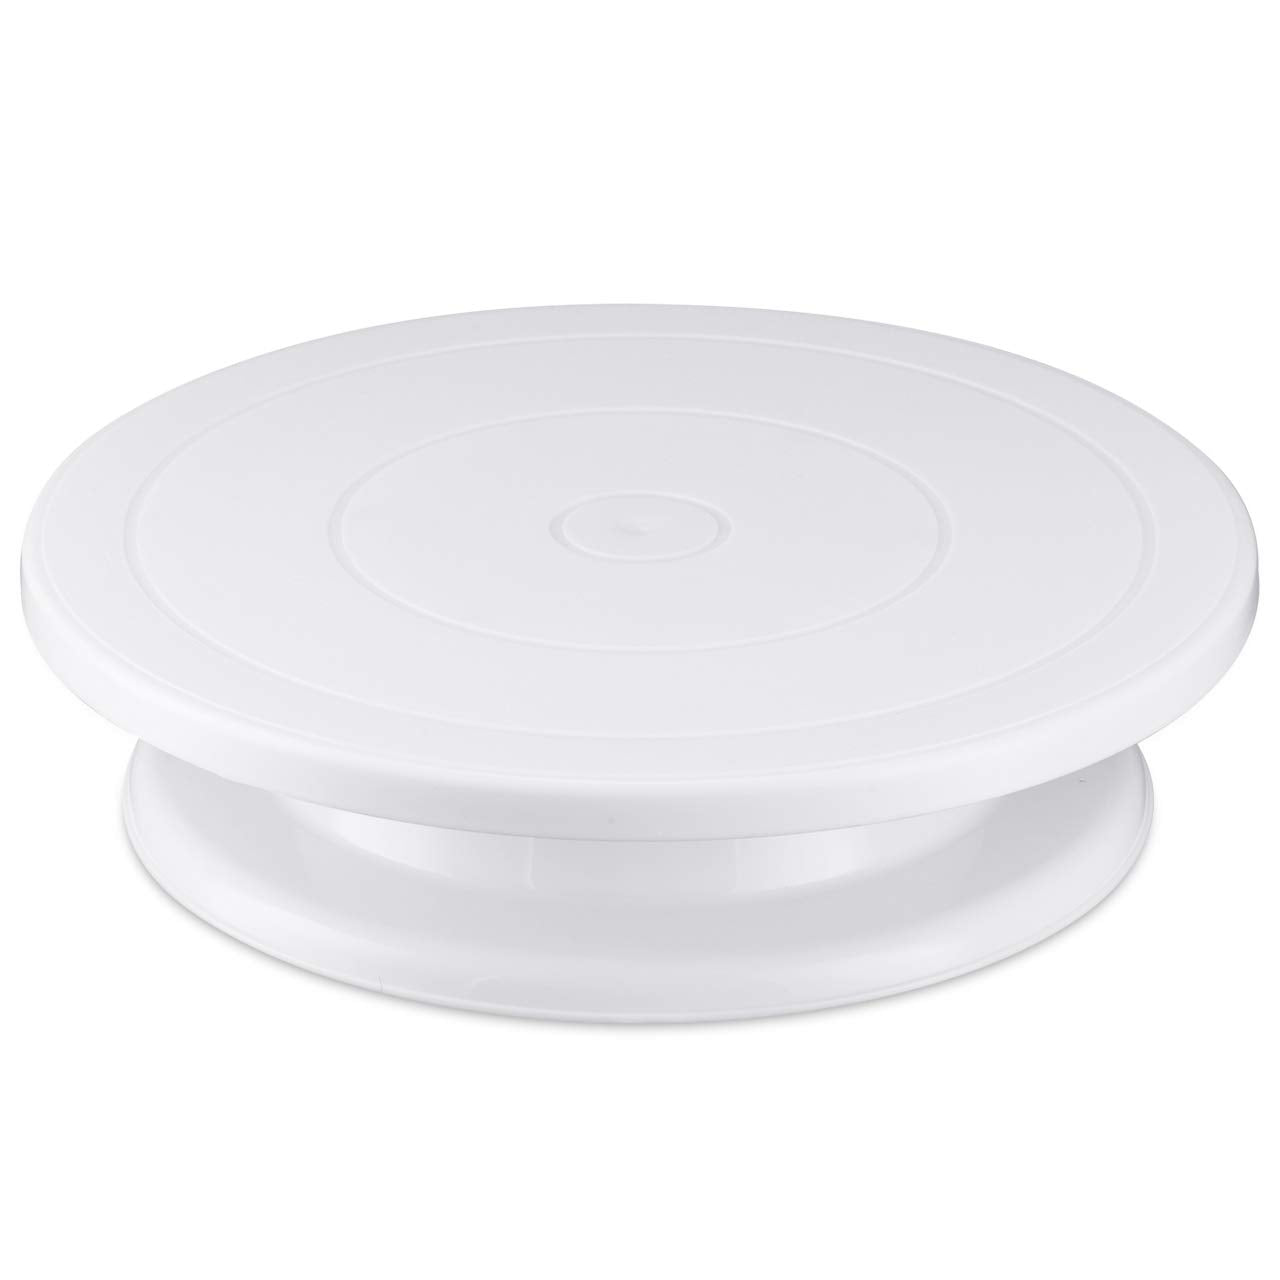 Knc 11 inch Rotating Cake Turntable with 3X Icing Smoother, Cake Stand, Revolving Cake Stand,Cake Decorating Tools,White Baking Cake Decorating